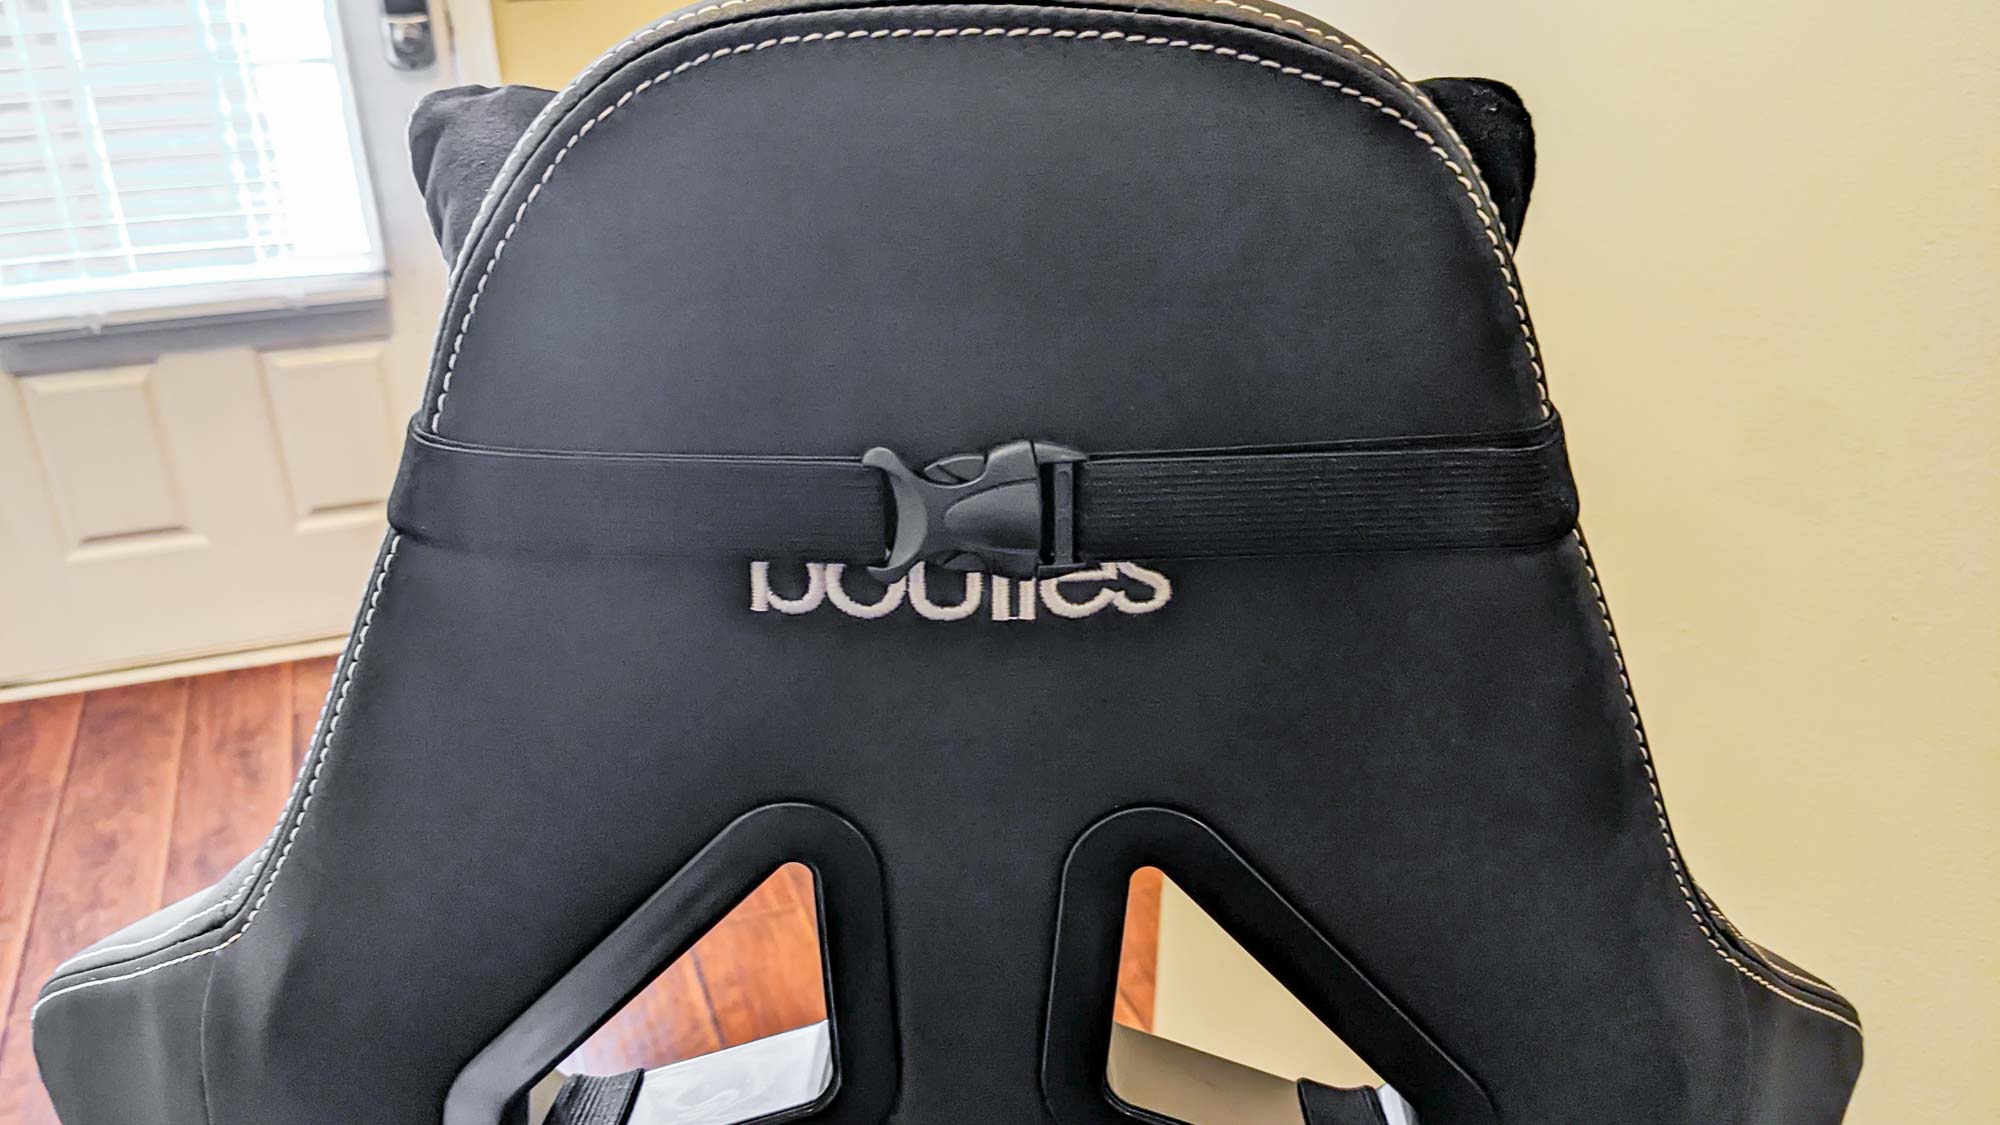 The strap you can use to adjust or remove the Boulies Ninja Pro's headrest pillow